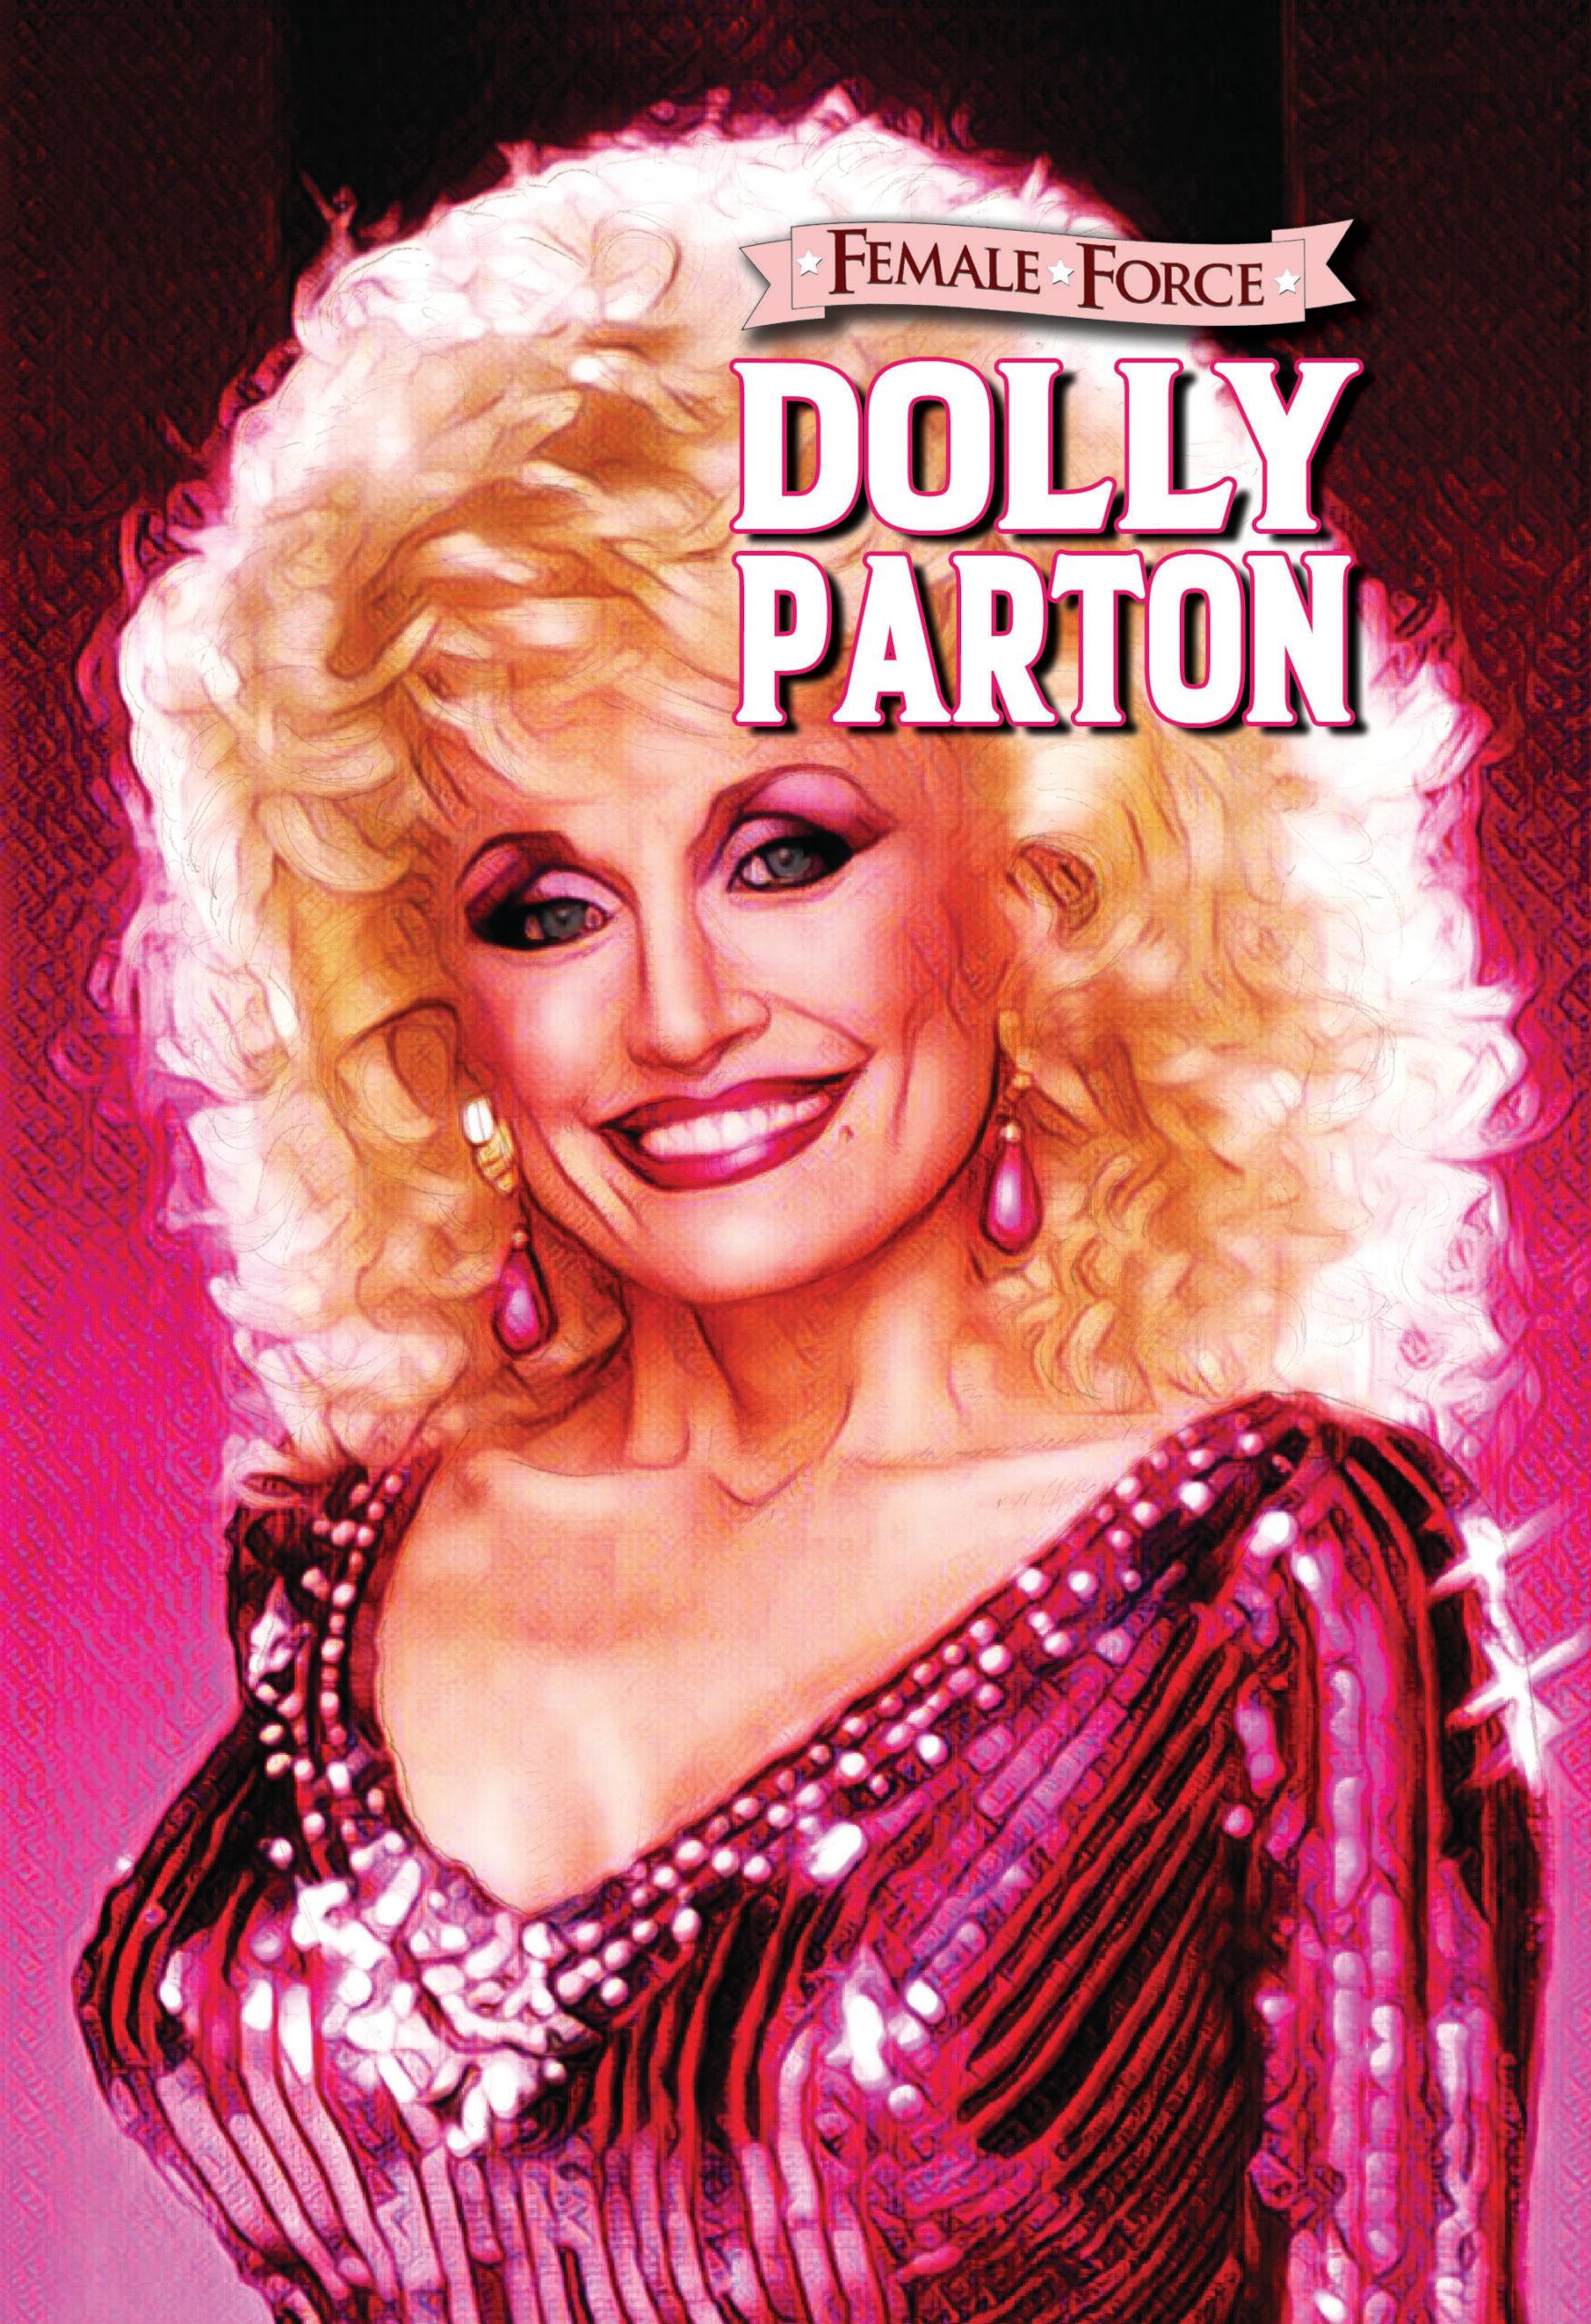 Dolly Parton is a comic book star